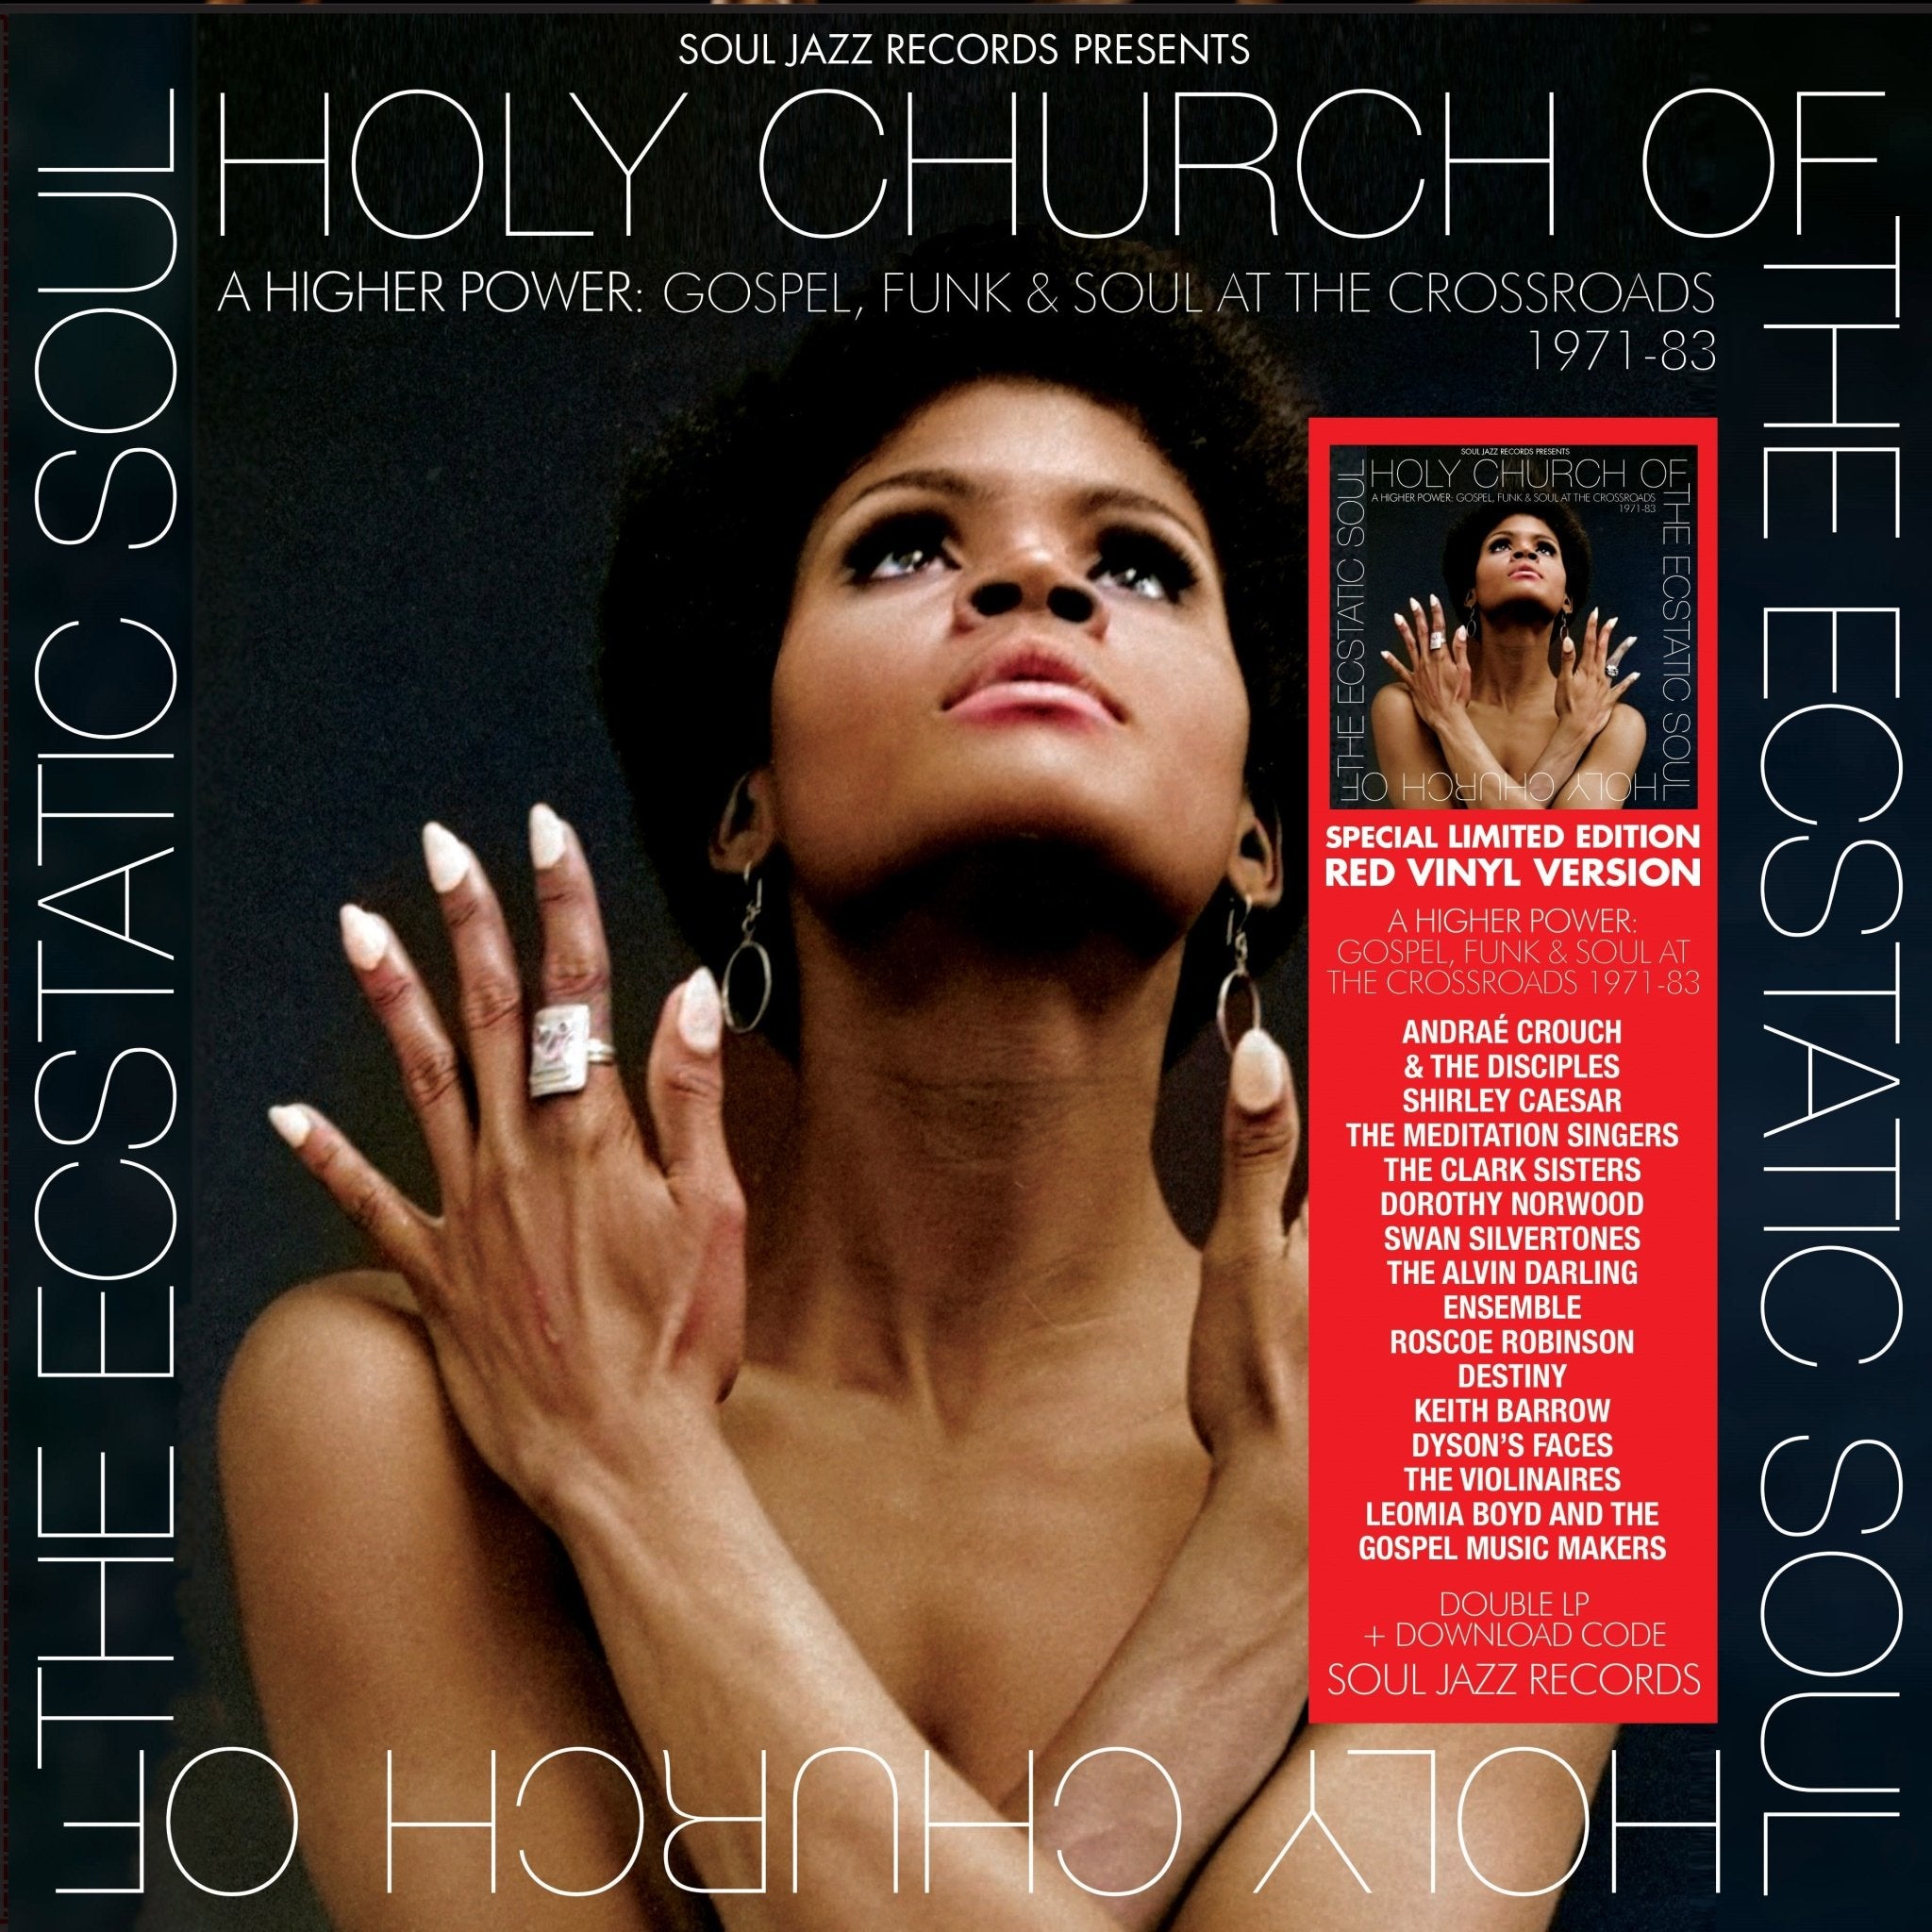 Holy Church Of The Ecstatic Soul - A Higher Power: Gospel, Funk & Soul At The Crossroads 1971-83 - 33RPM